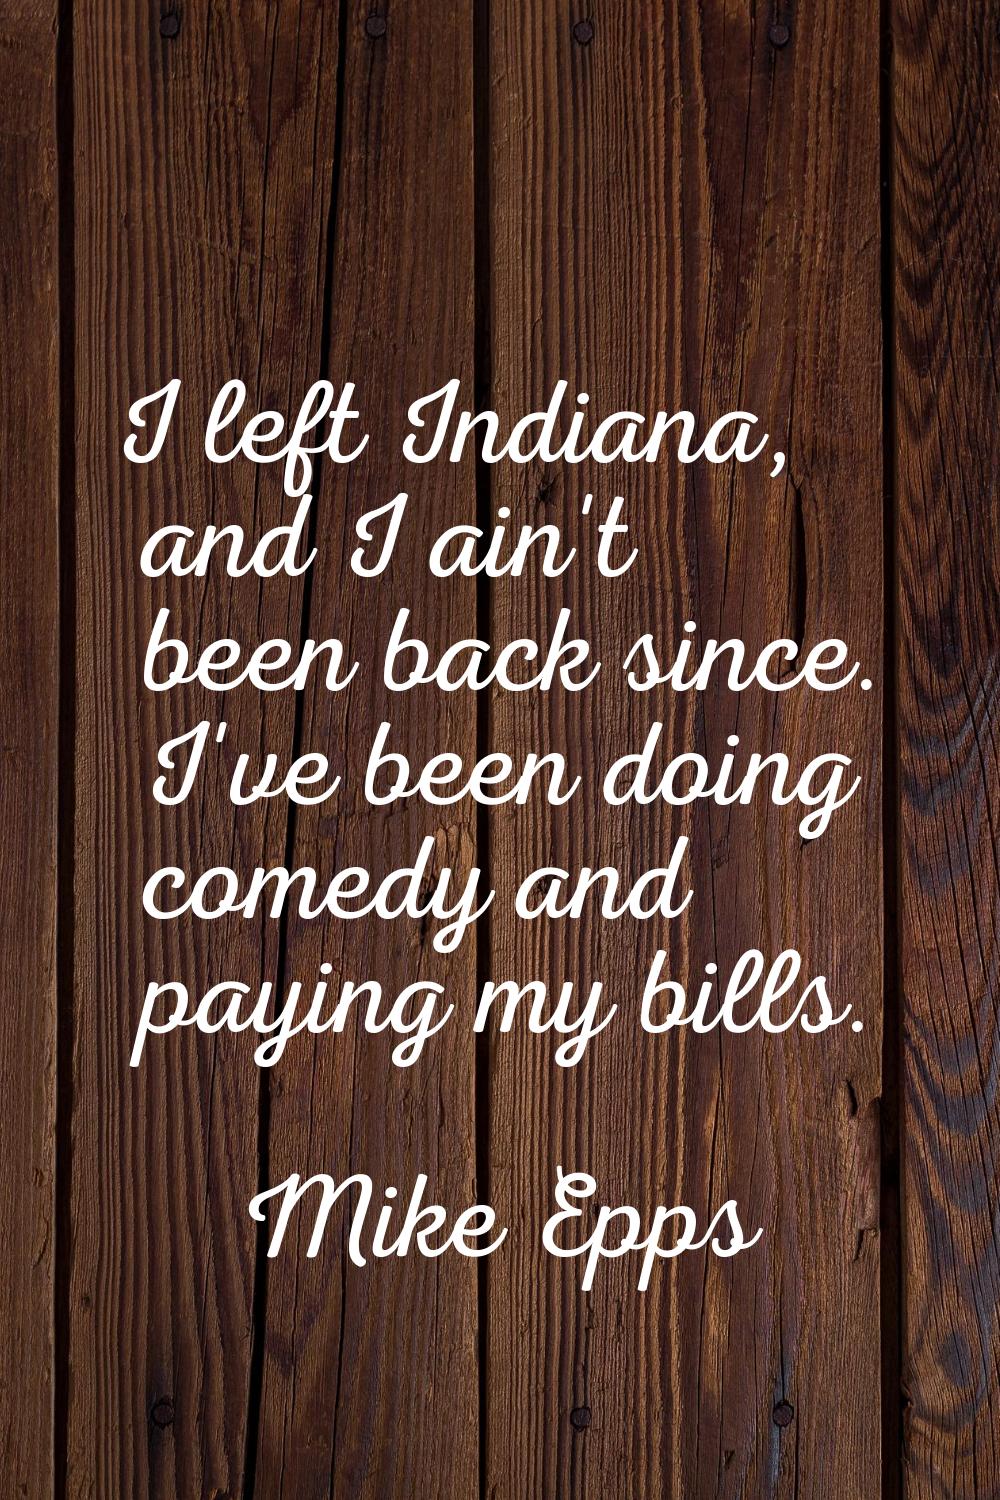 I left Indiana, and I ain't been back since. I've been doing comedy and paying my bills.